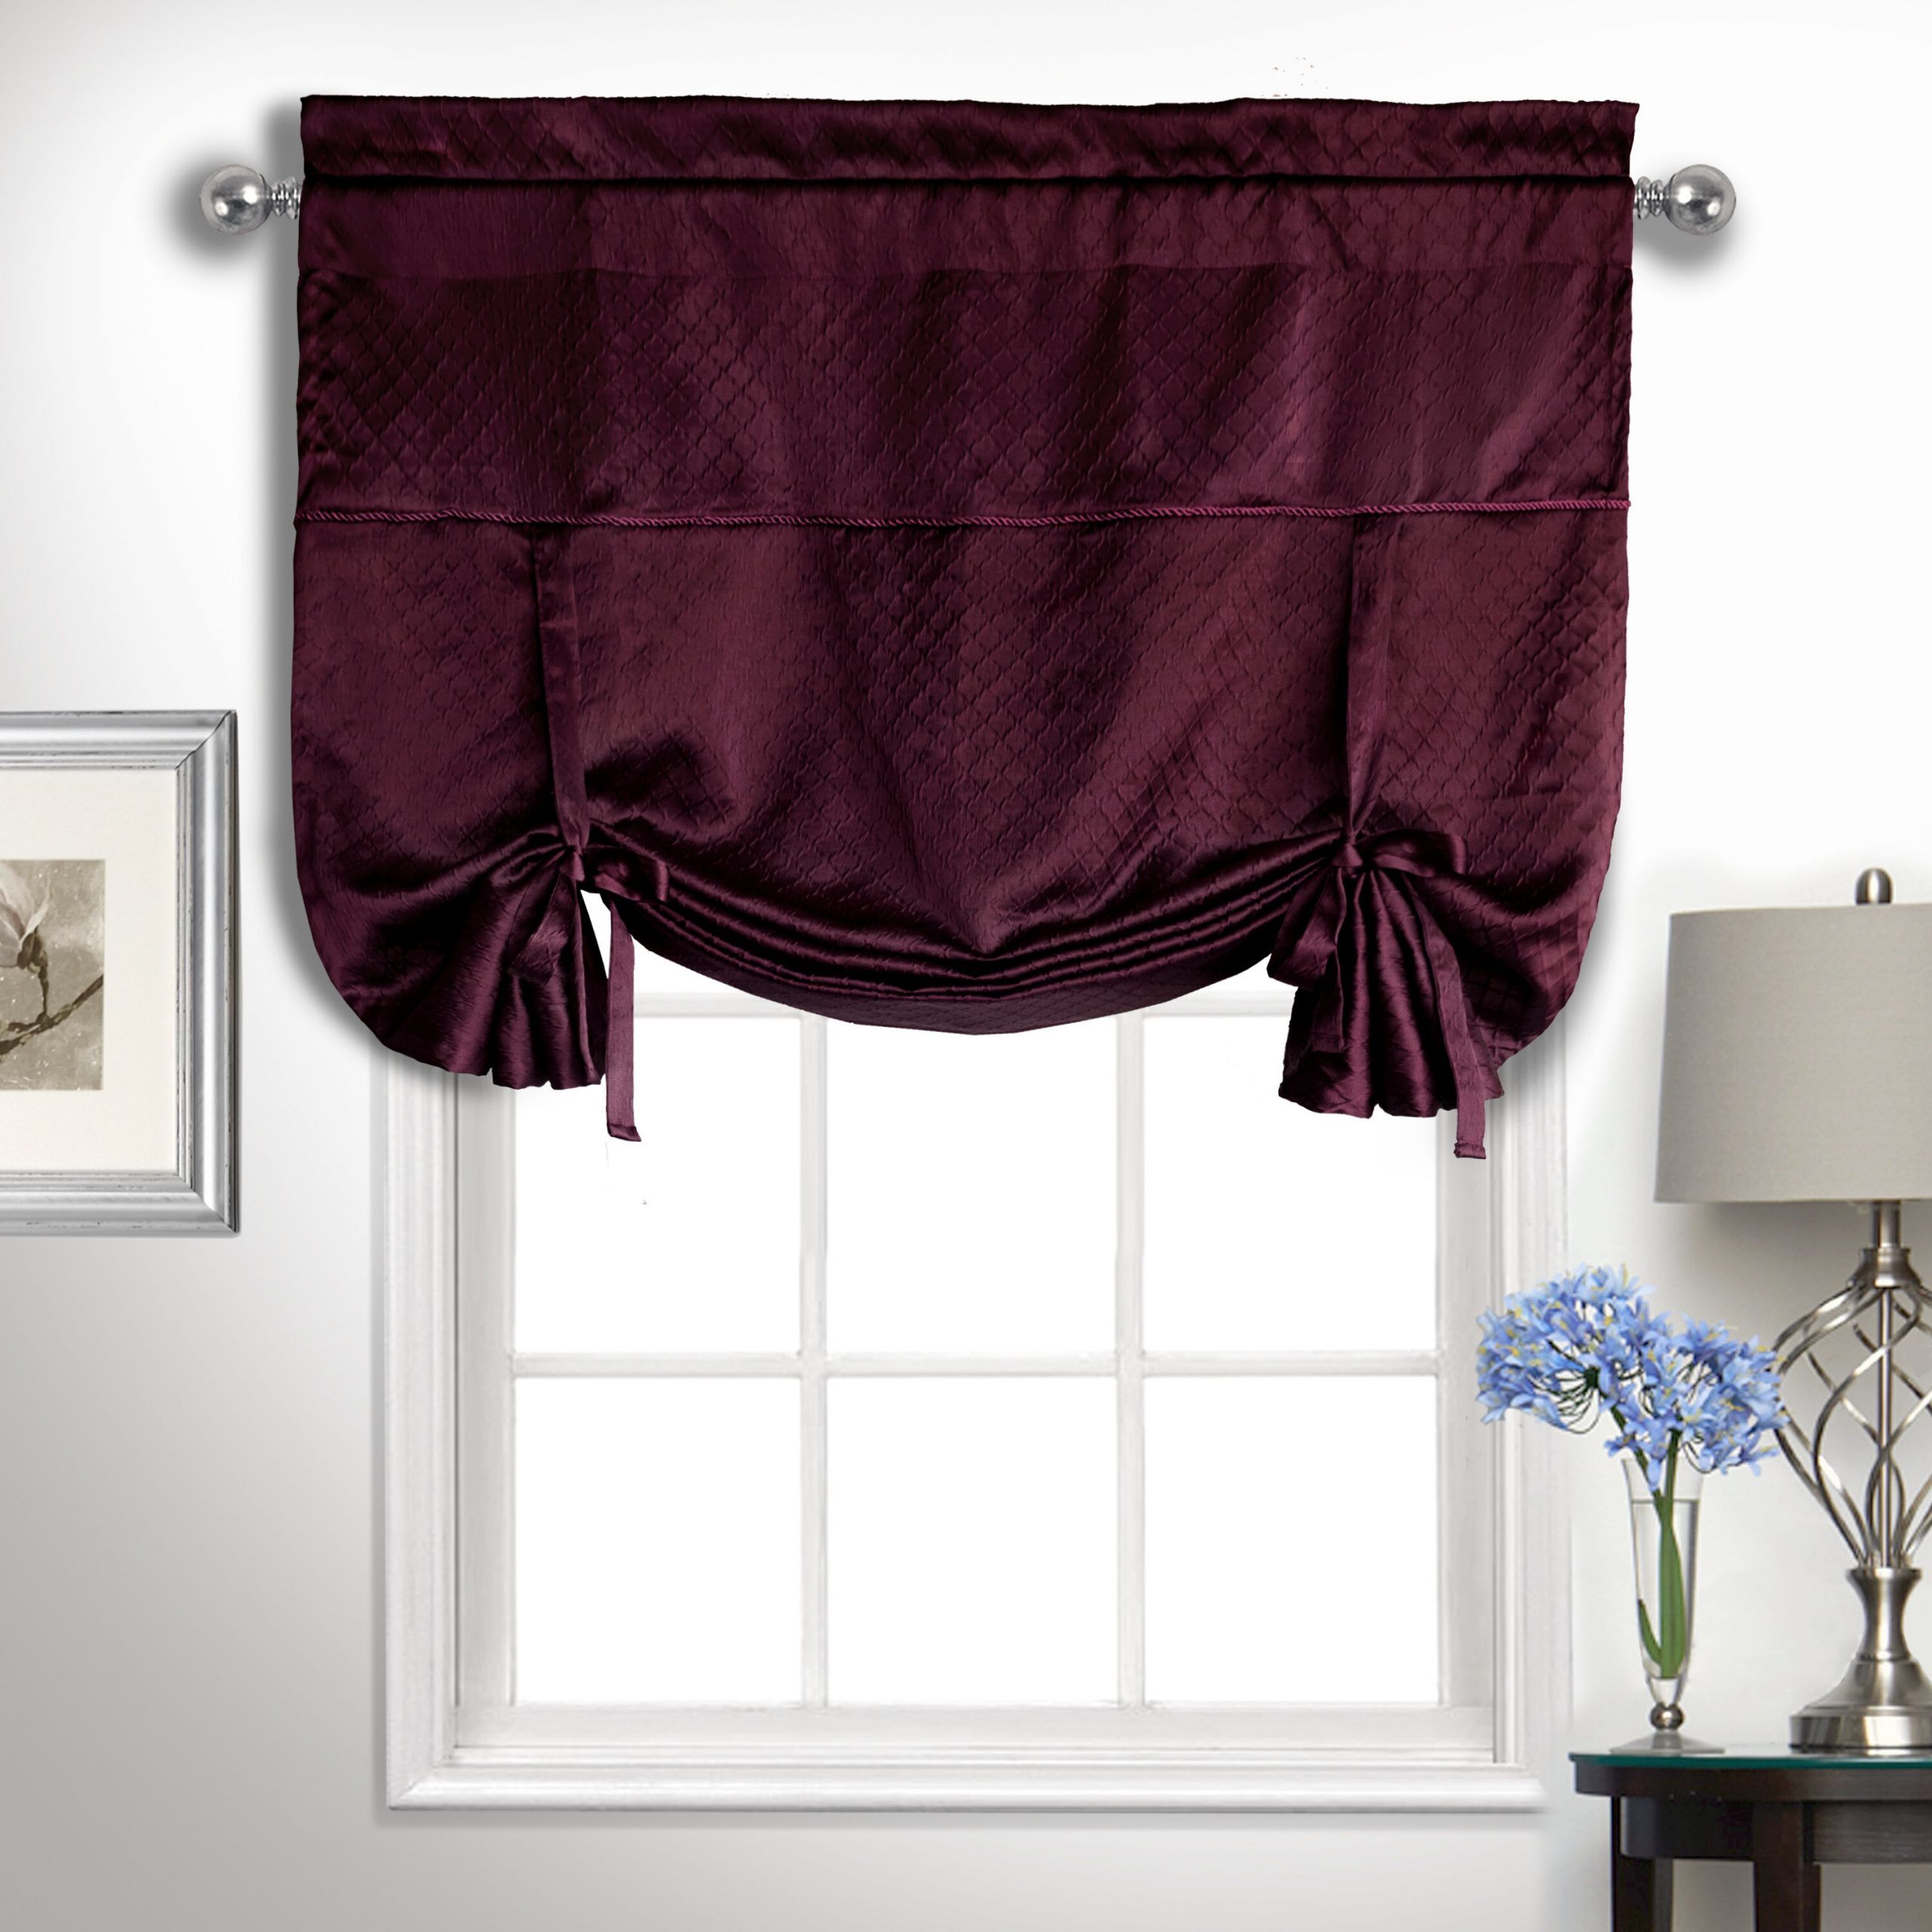 Solana Topper Curtain Valance Within Tailored Toppers With Valances (View 5 of 20)